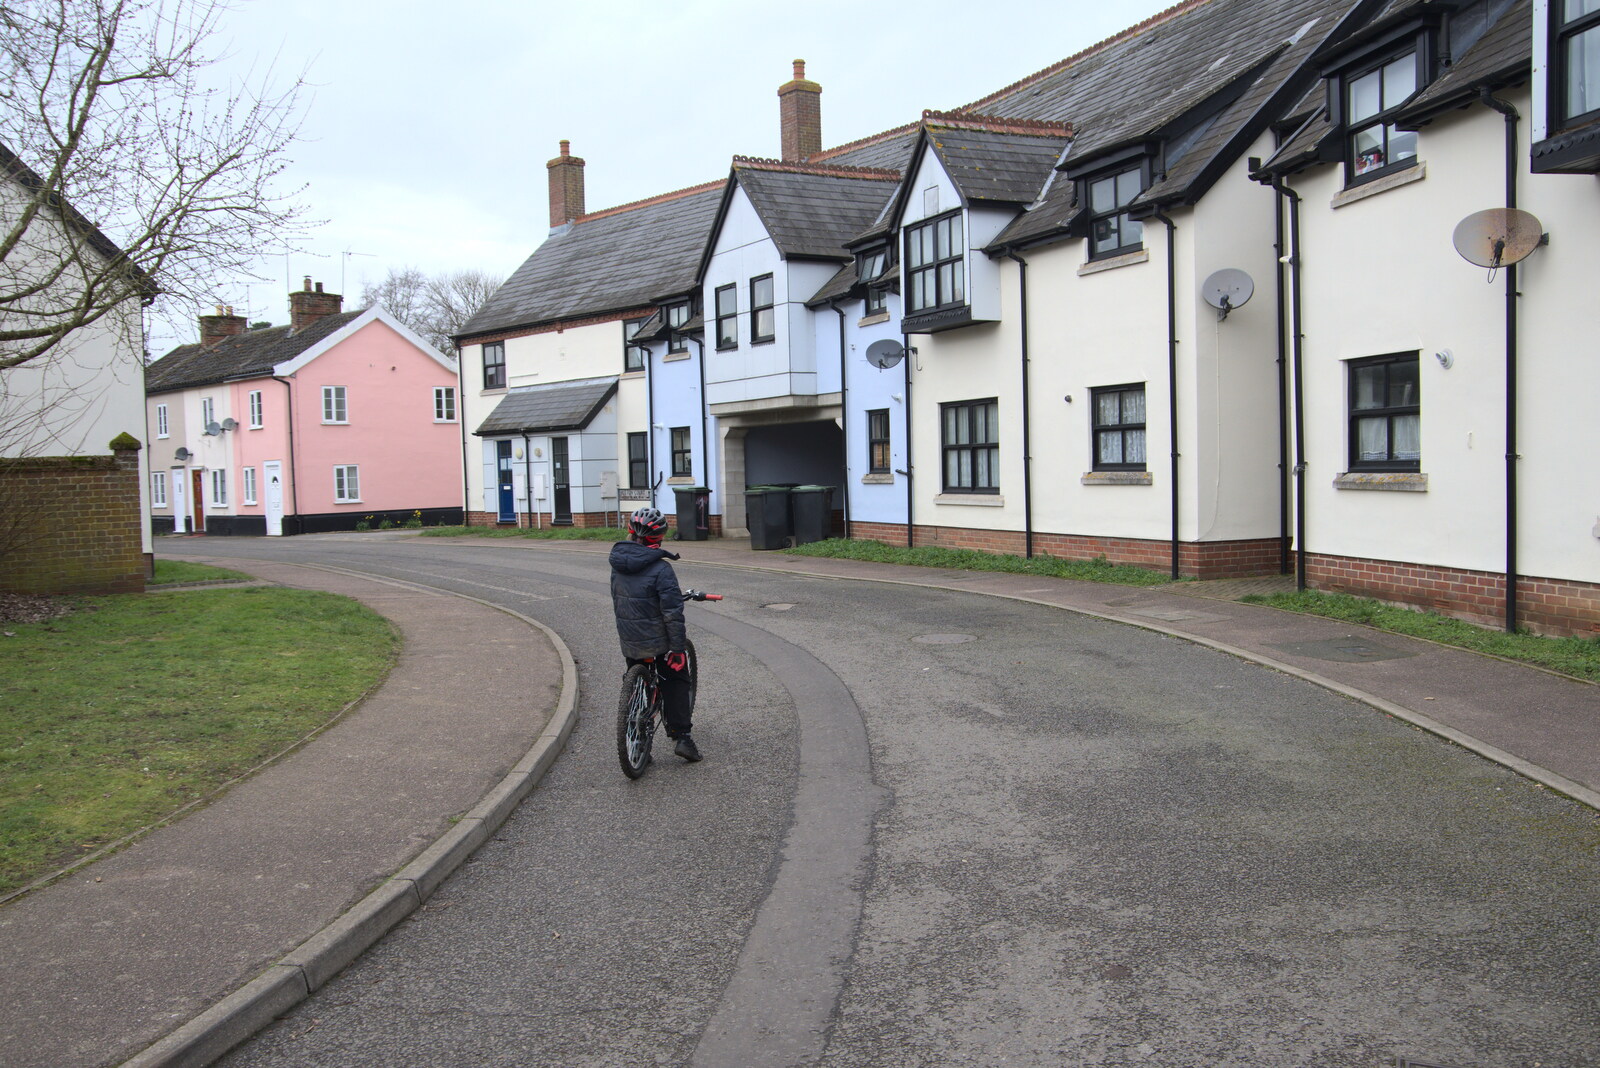 Harry waits on Wellington Road from The Old Sewage Works, The Avenue, Brome, Suffolk - 20th February 2021